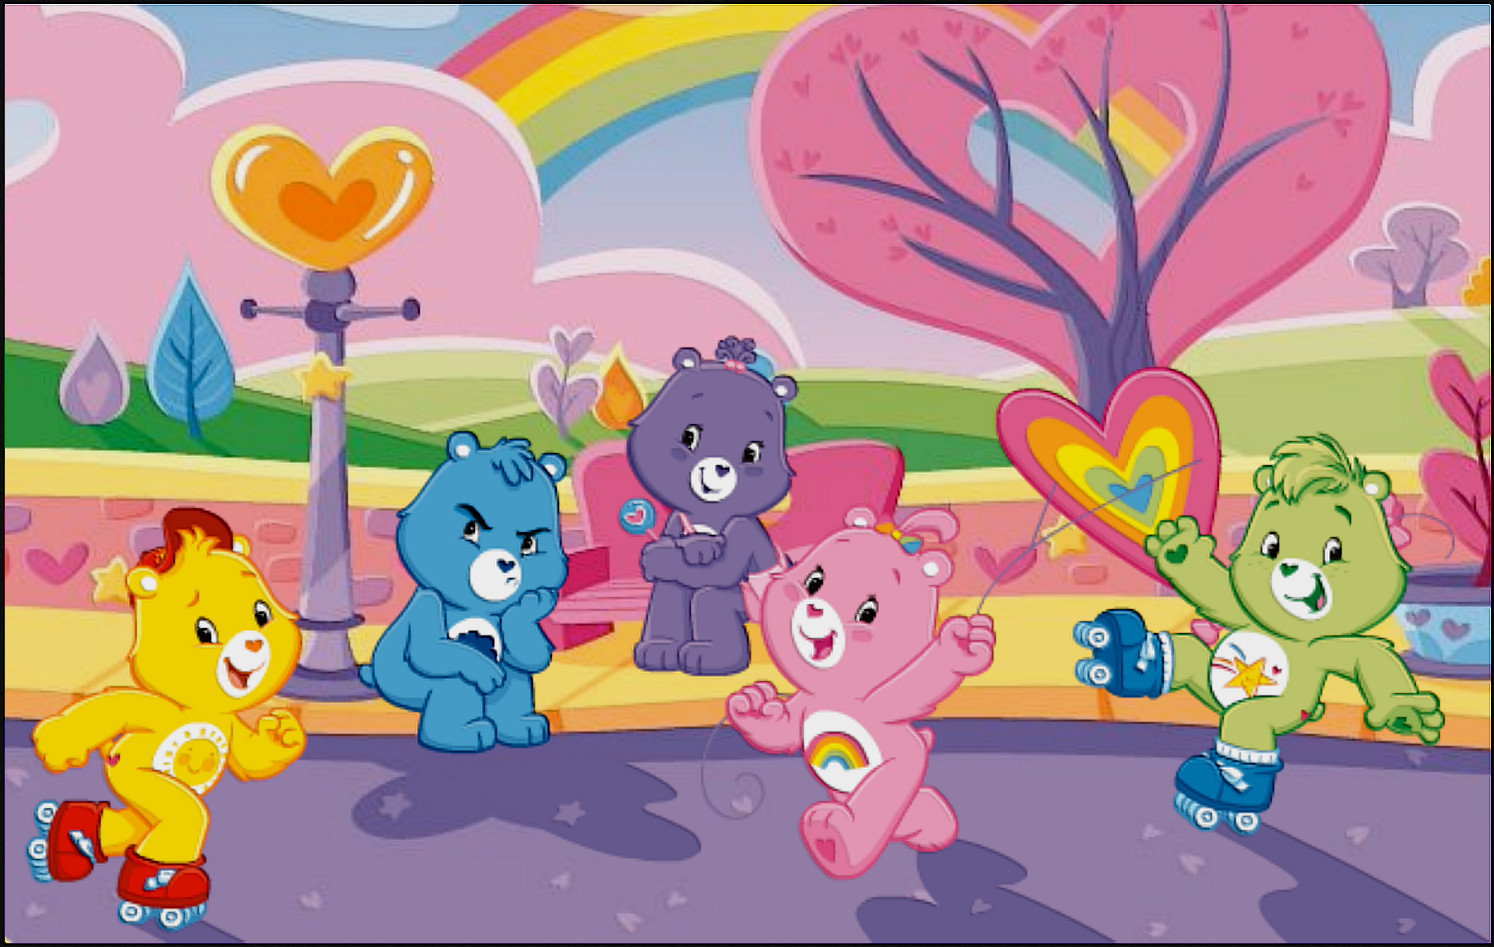 Carebears Wallpaper Max Quality By Turbahull